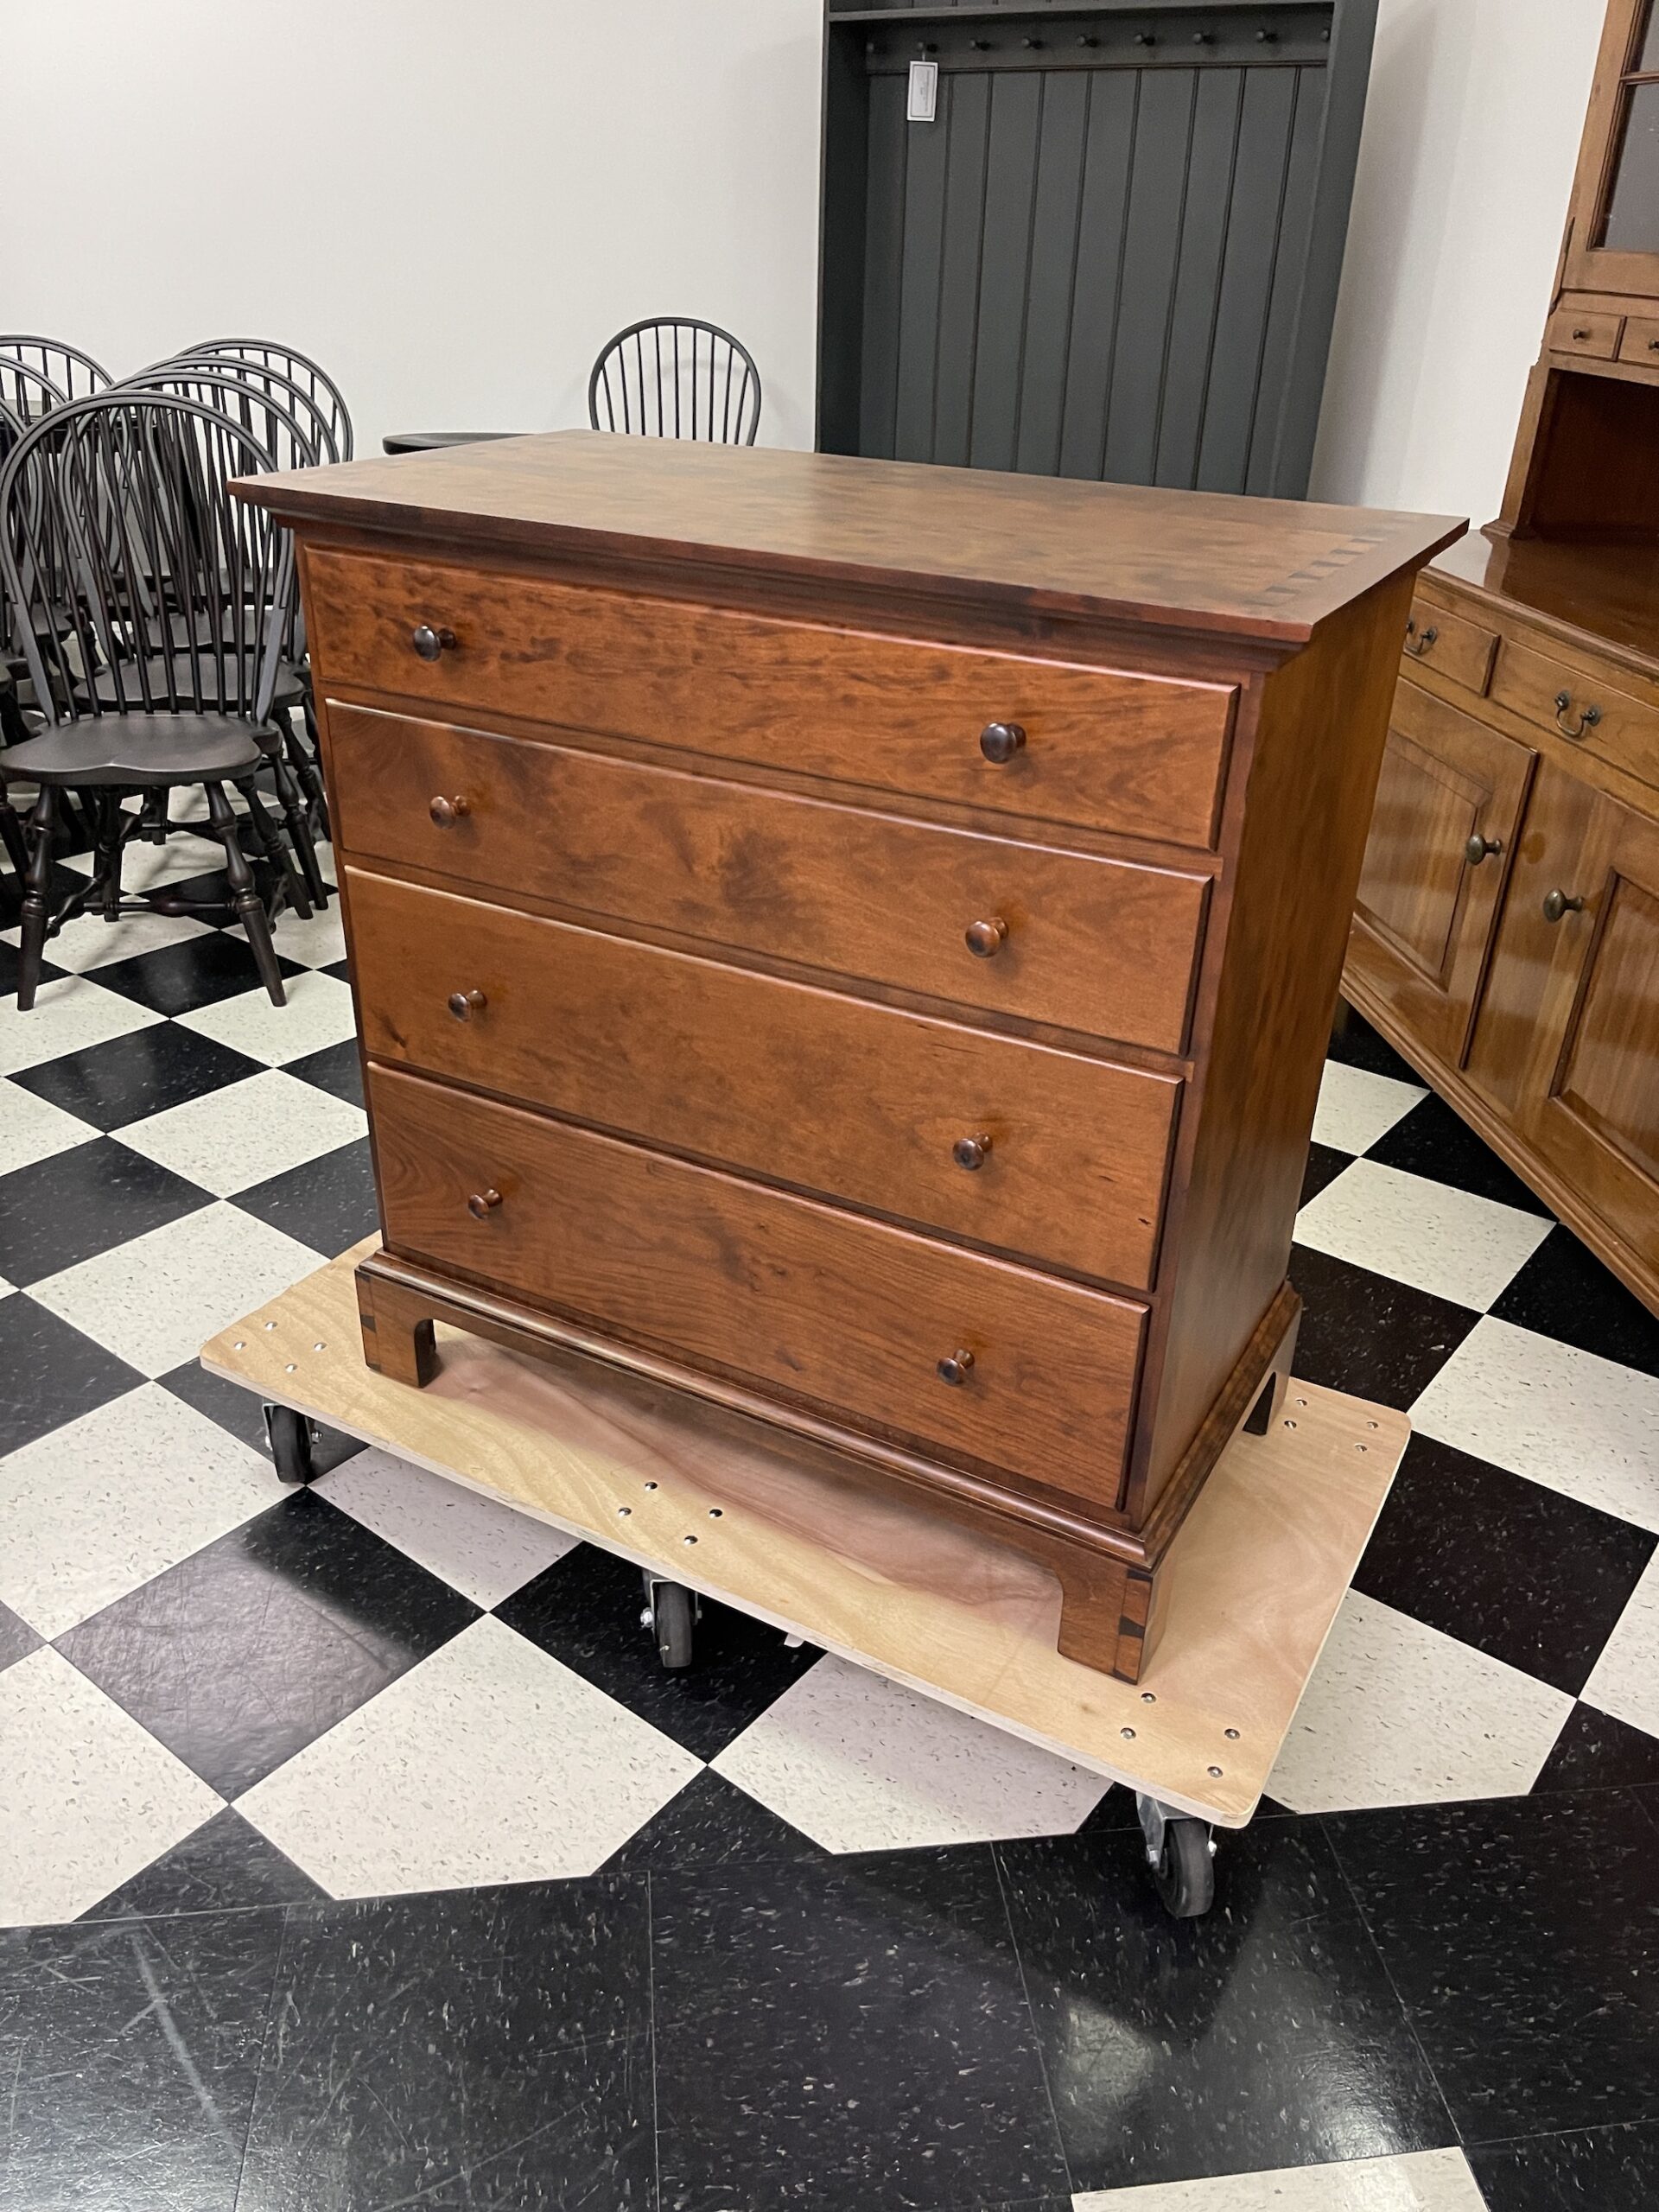 New Model - Cherry Shaker Style Chest of Drawers - 4 Drawers Image